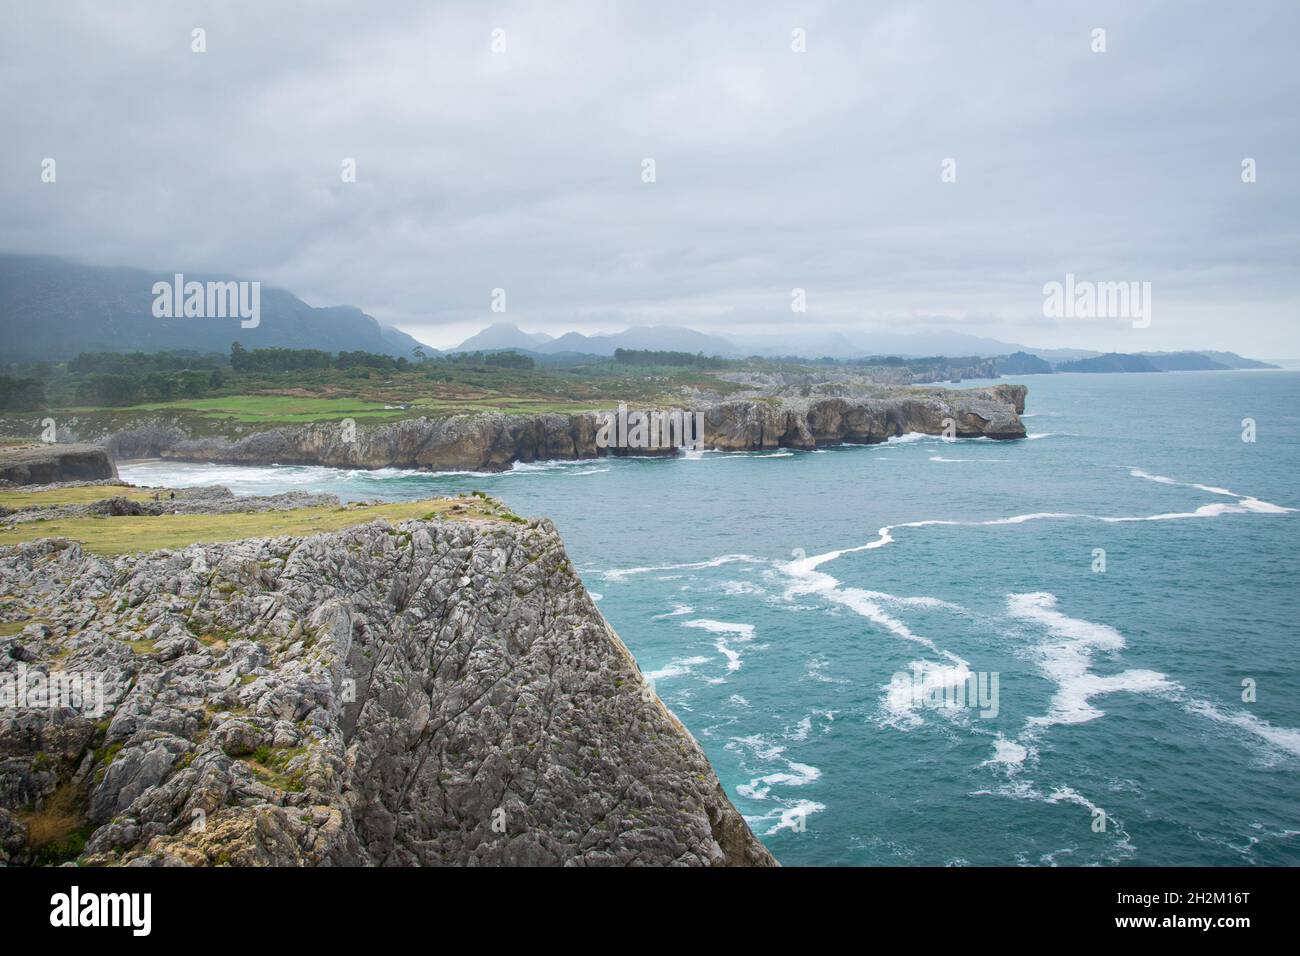 Dramatic cliffs at the Cantabrian coast in famous Bufones de Pria on a misty autumn day. Moody coastal landscape in Asturias, Northern Spain. Stock Photo